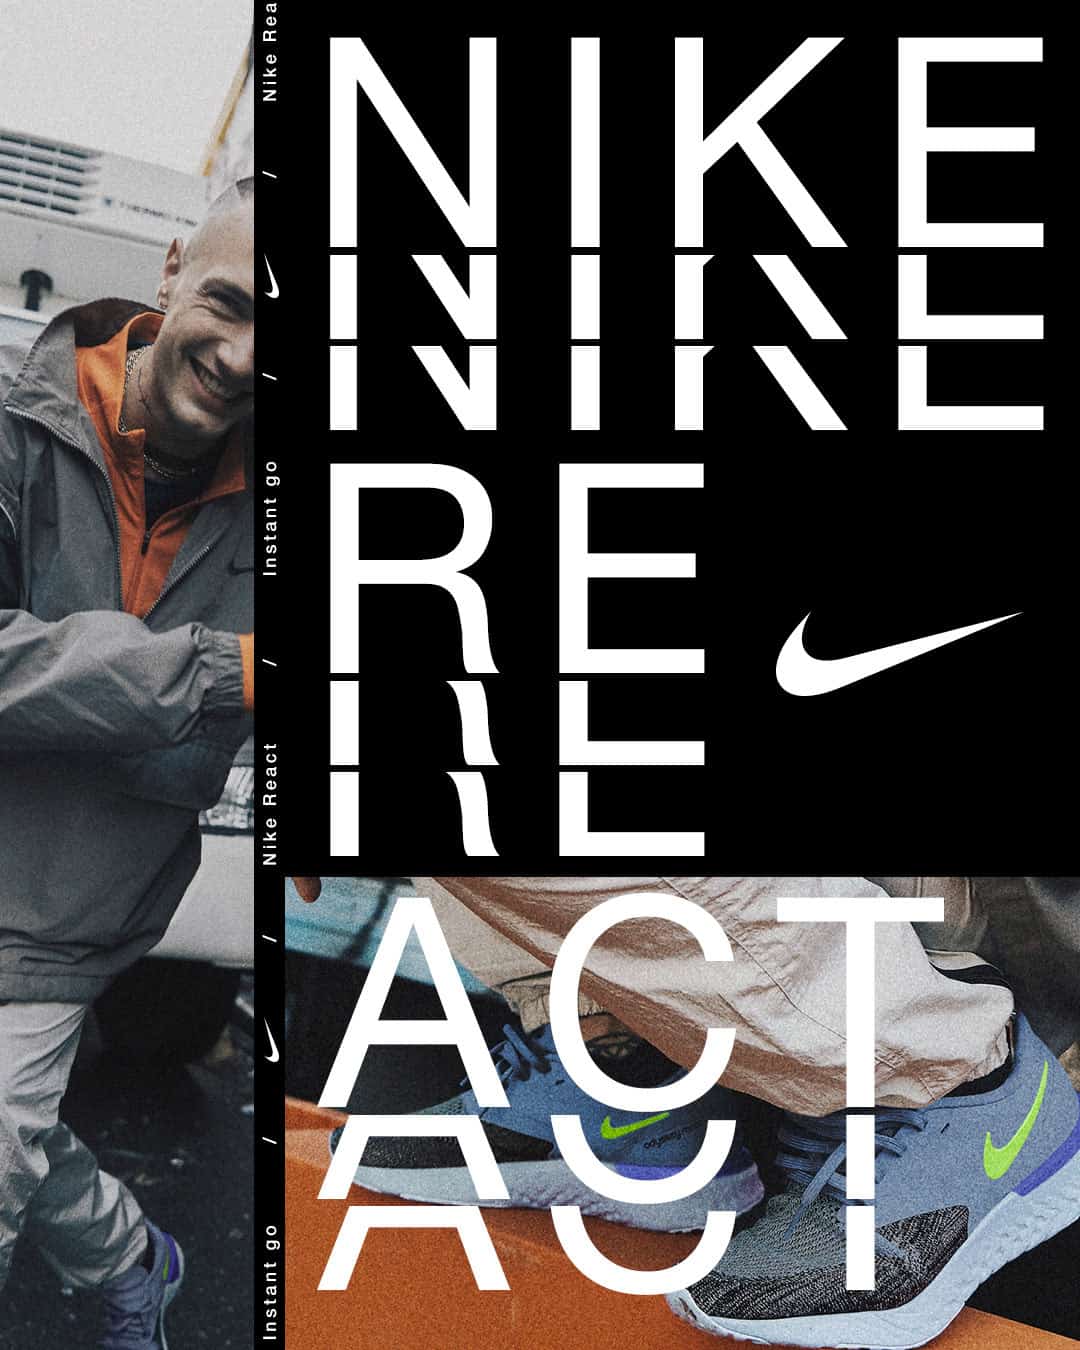 Tran x Conscious Minds – Nike React IG Typographic Poster Campaign 1 Campfire